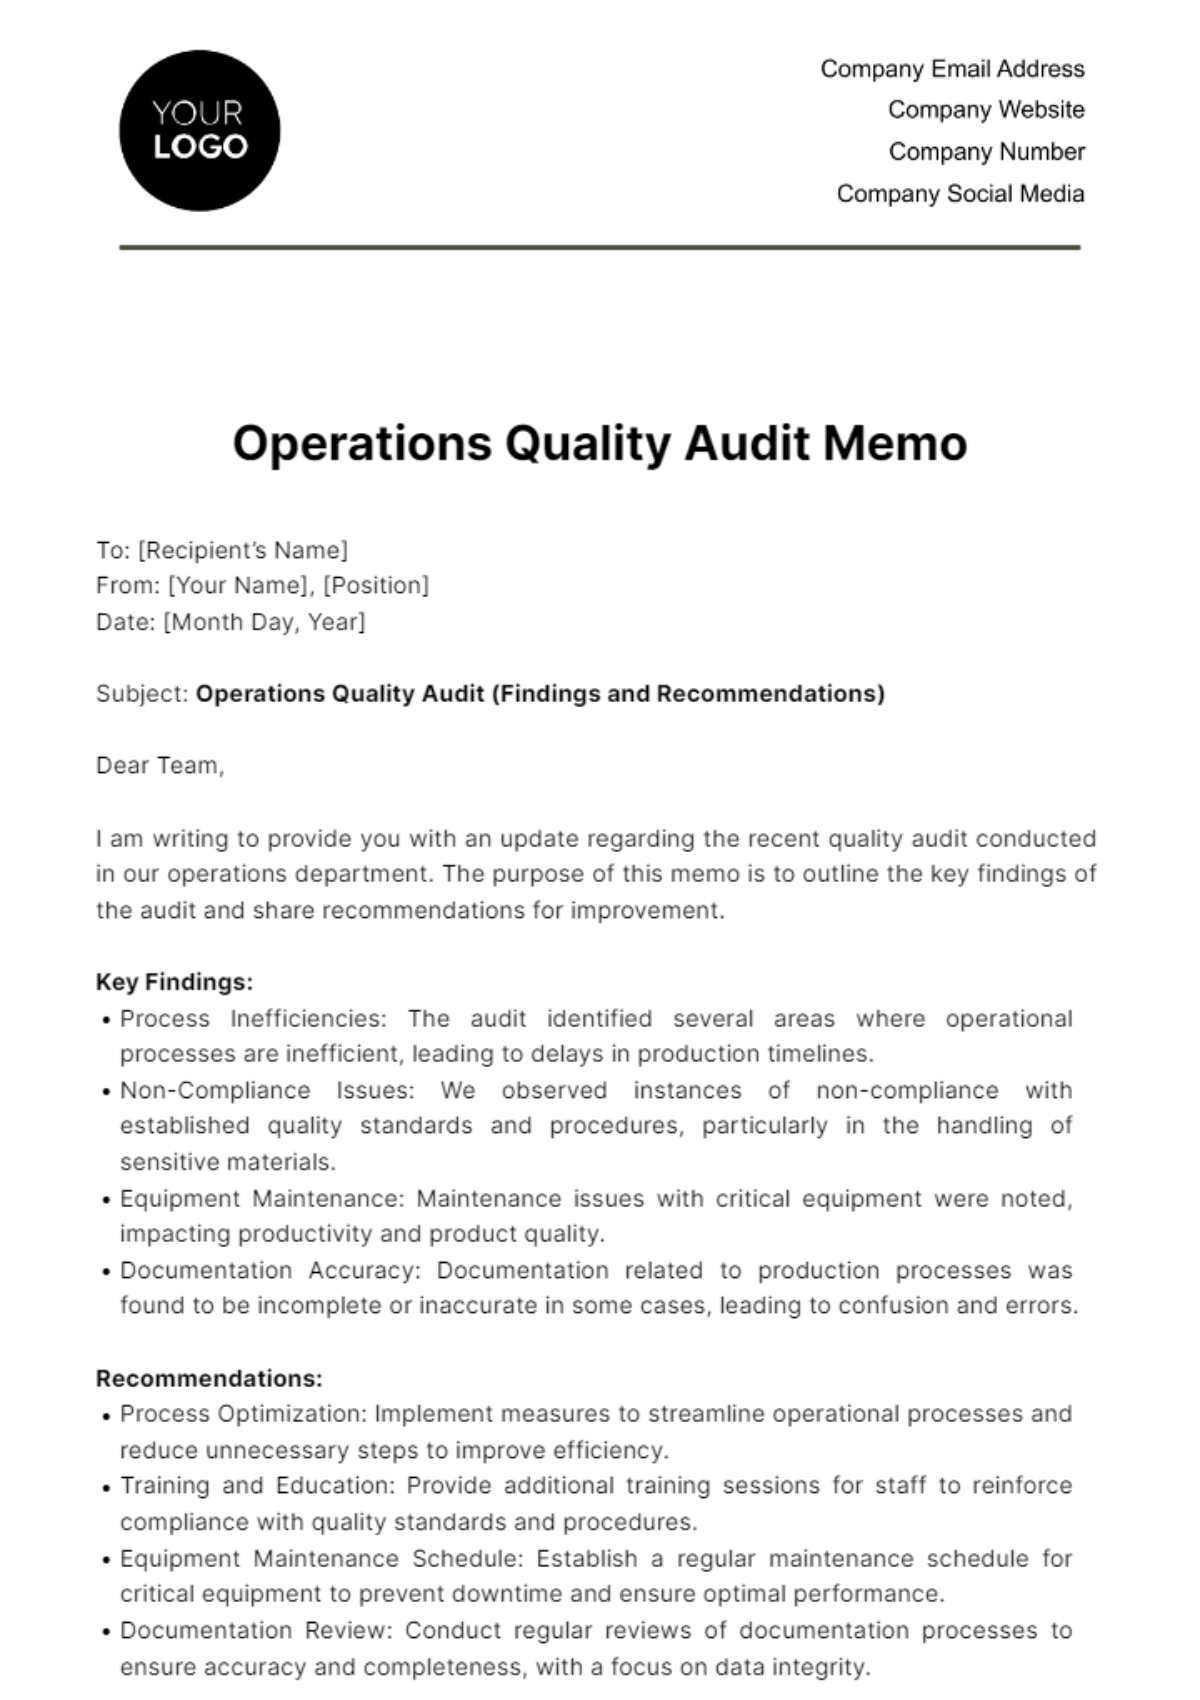 Free Operations Quality Audit Memo Template